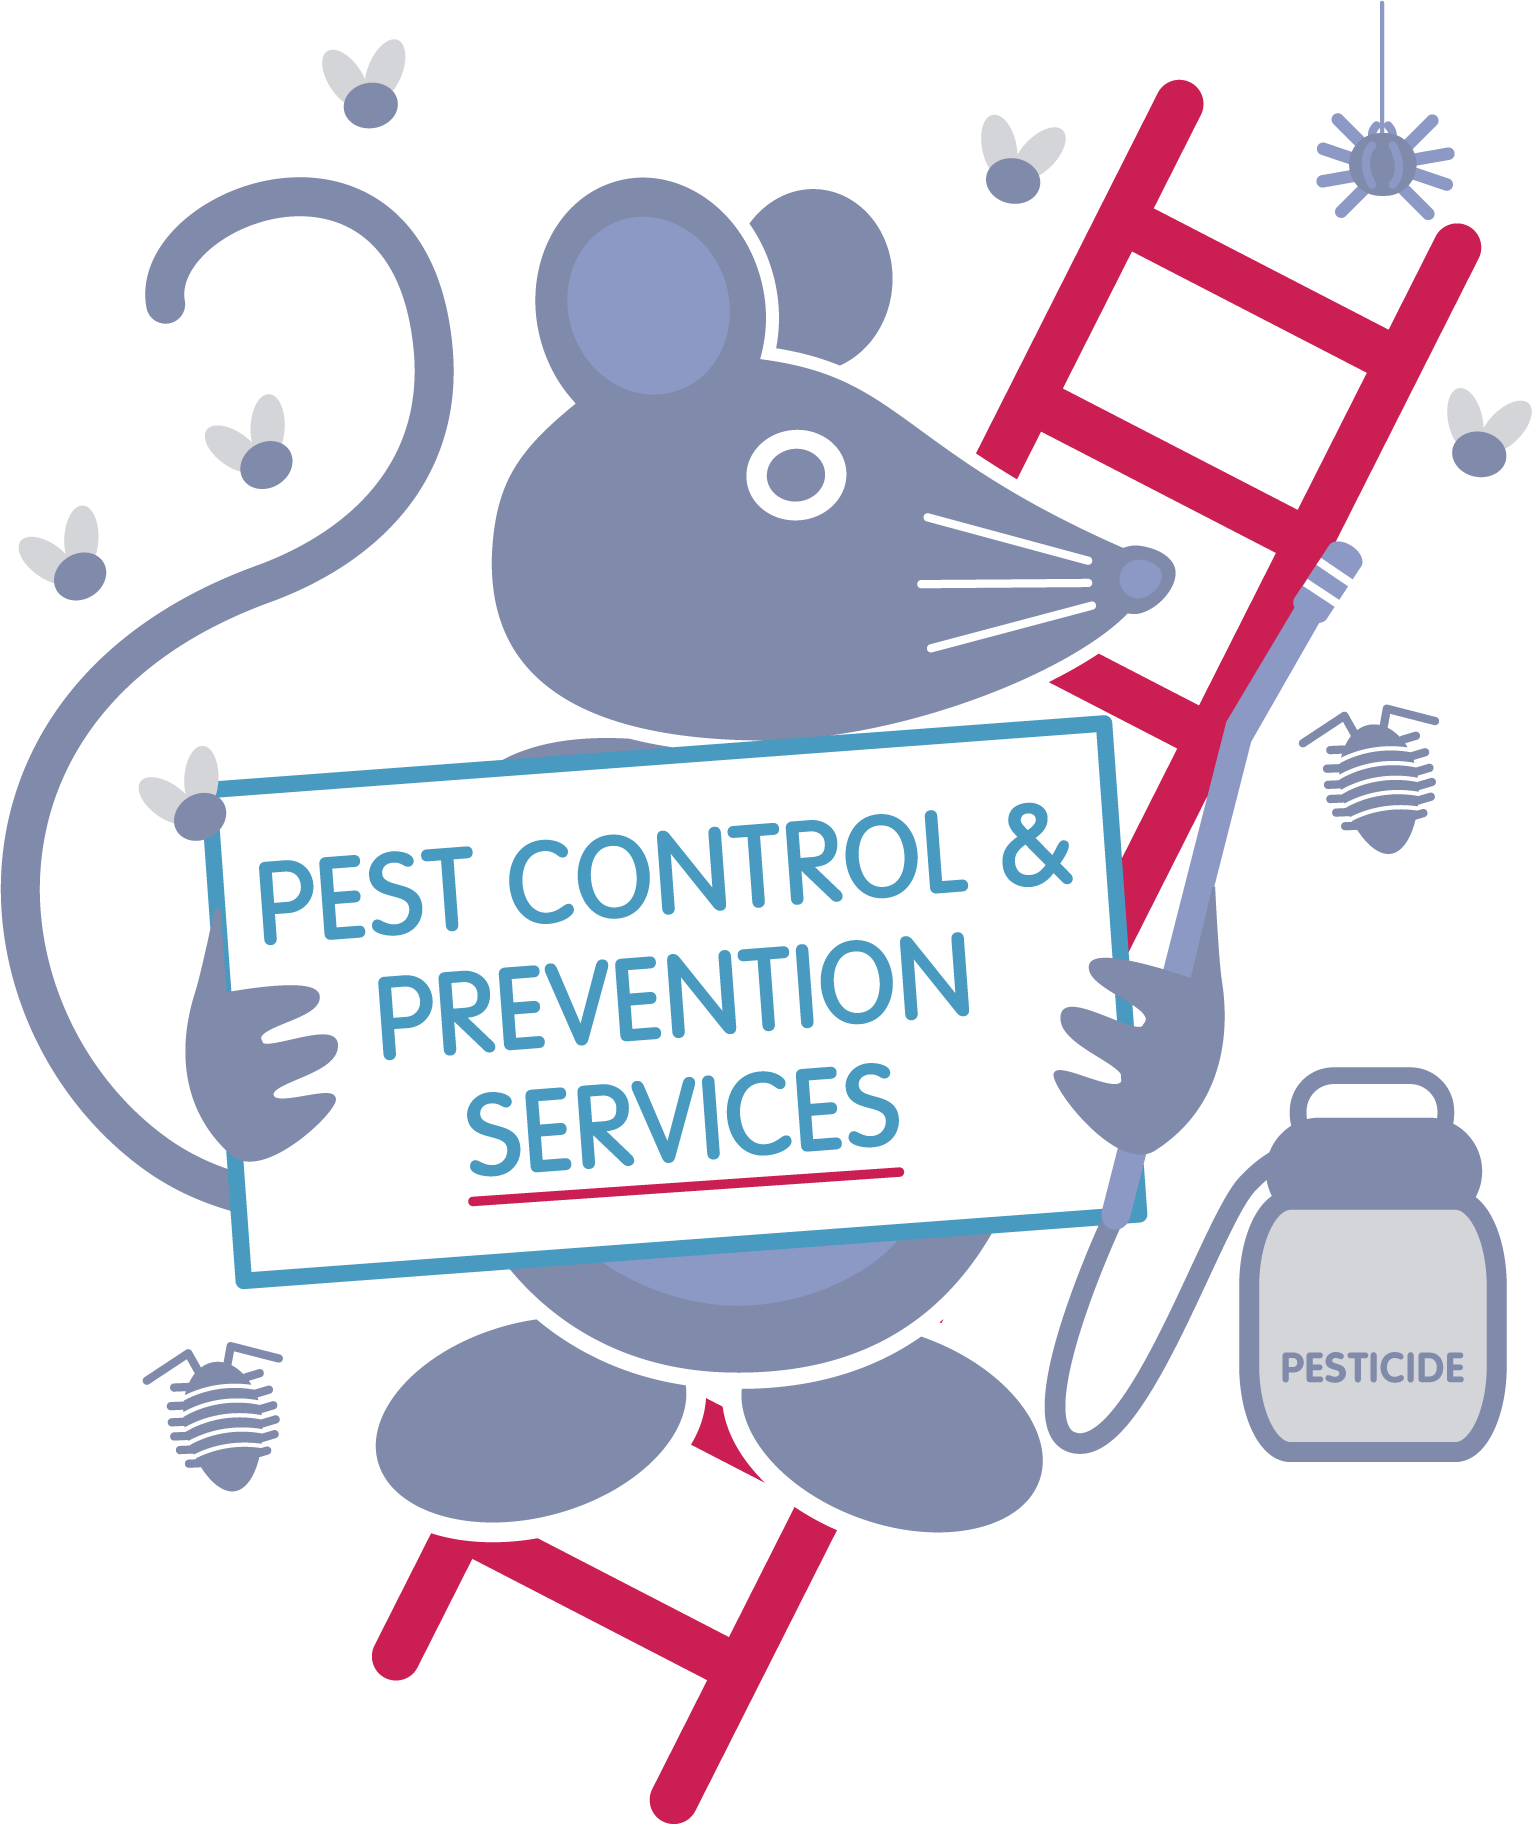 Pest control and prevention services